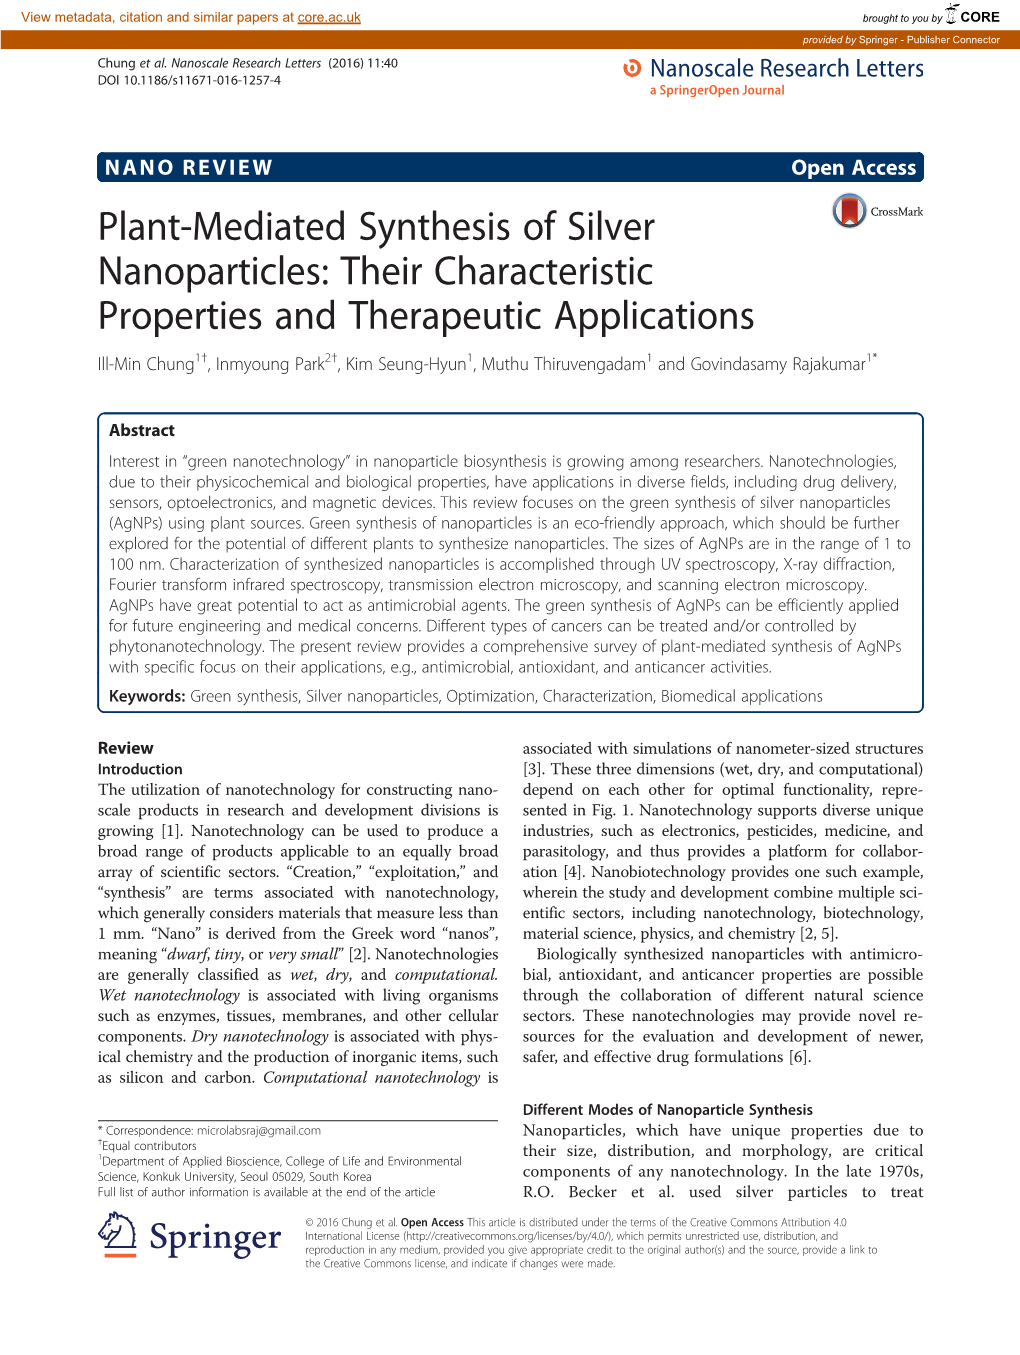 Plant-Mediated Synthesis of Silver Nanoparticles